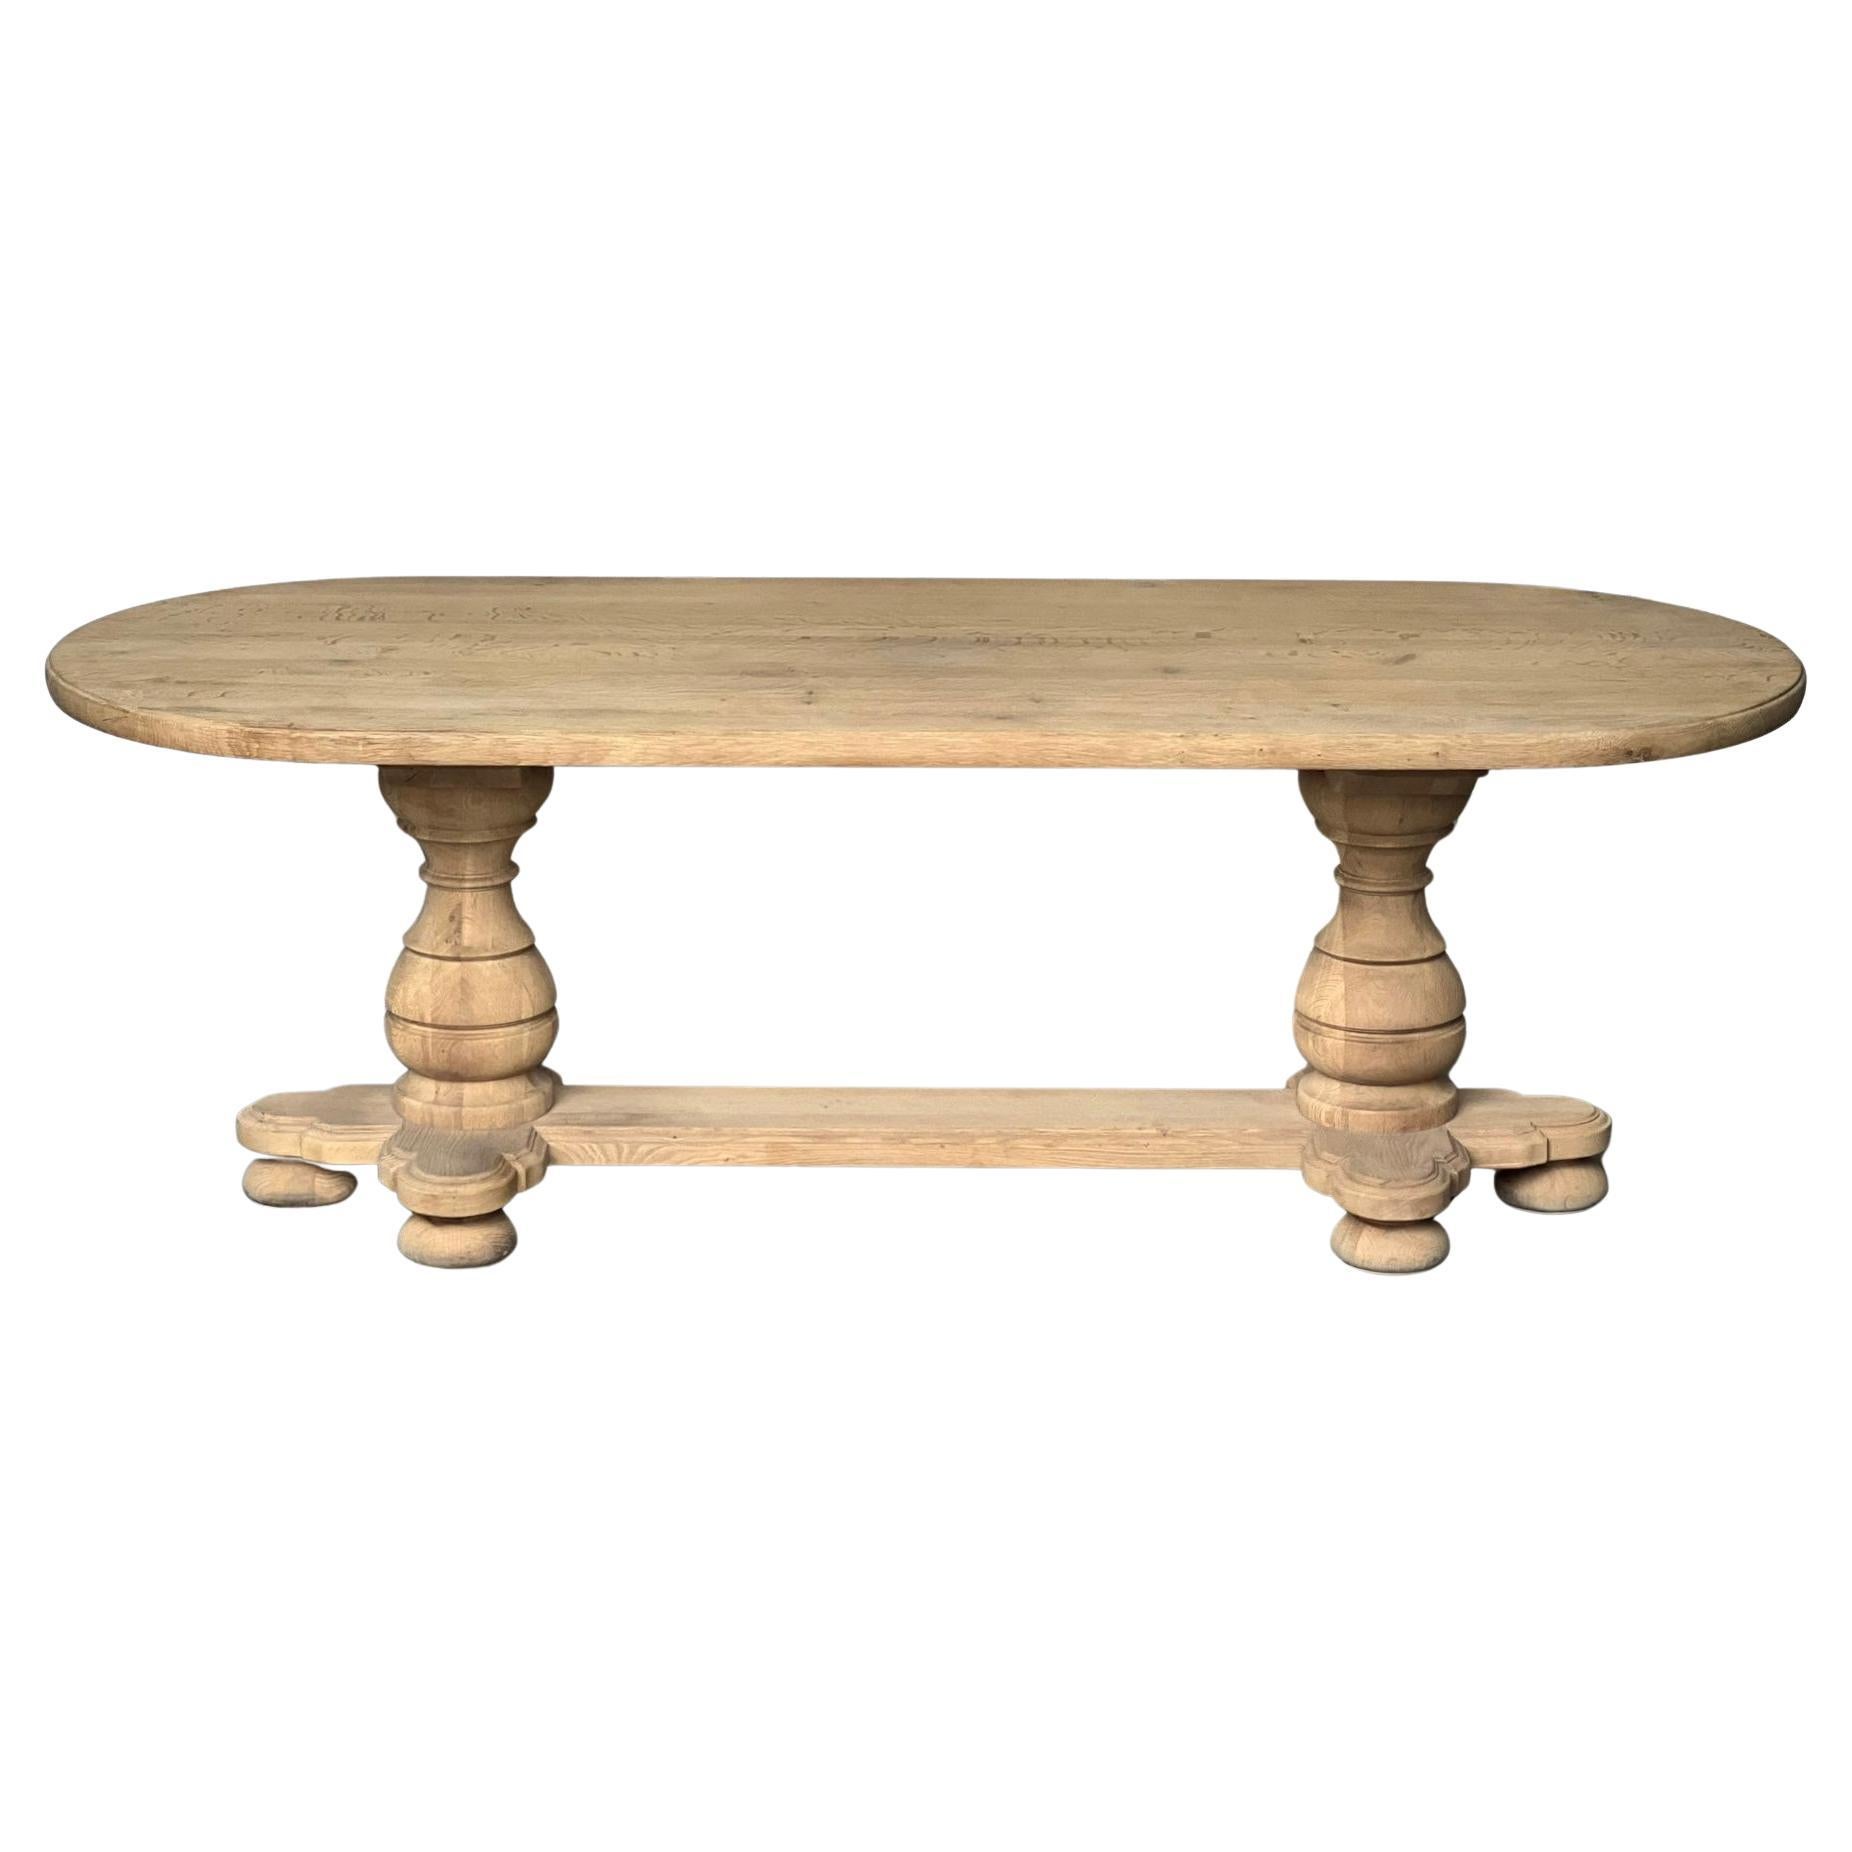 French Bleached Oak Monastery Refectory Dining Table